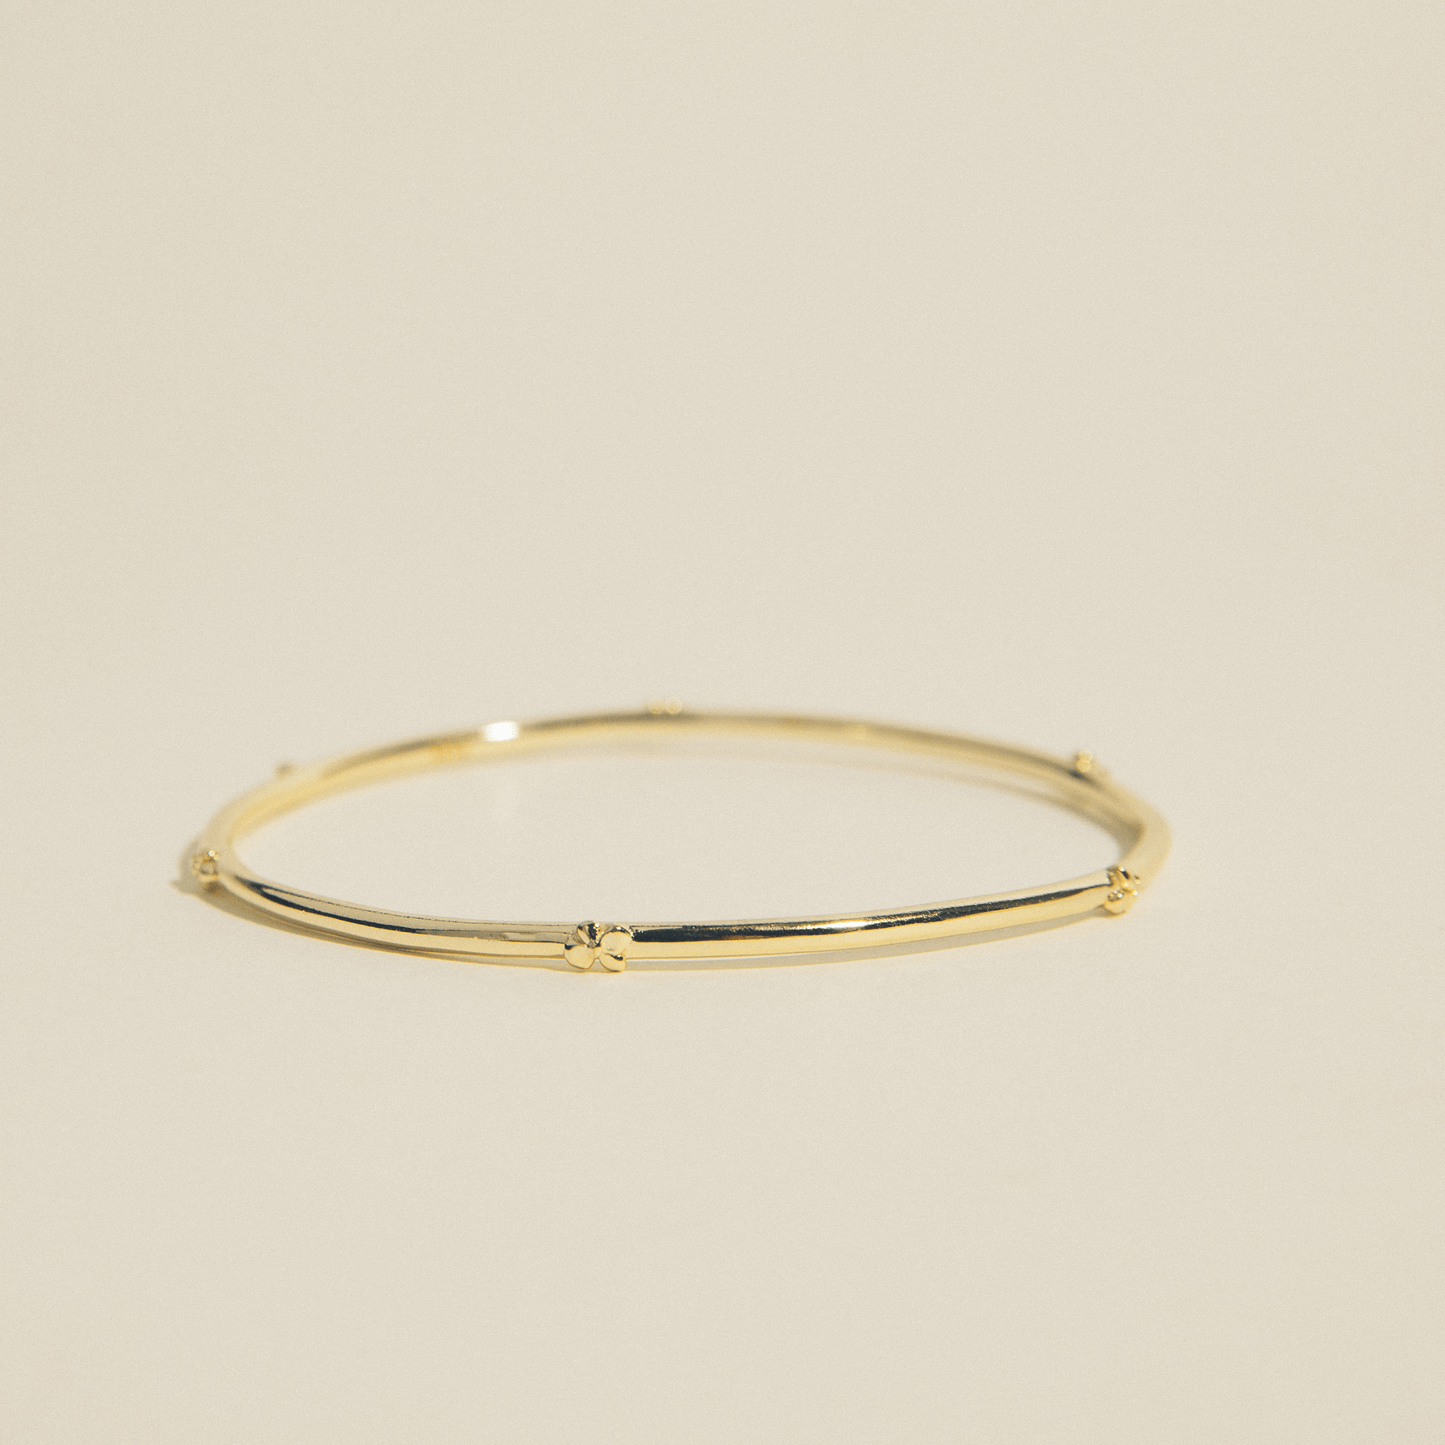 The hydrangea bangle is a thin golden bangle adorned with hydrangea flowers.